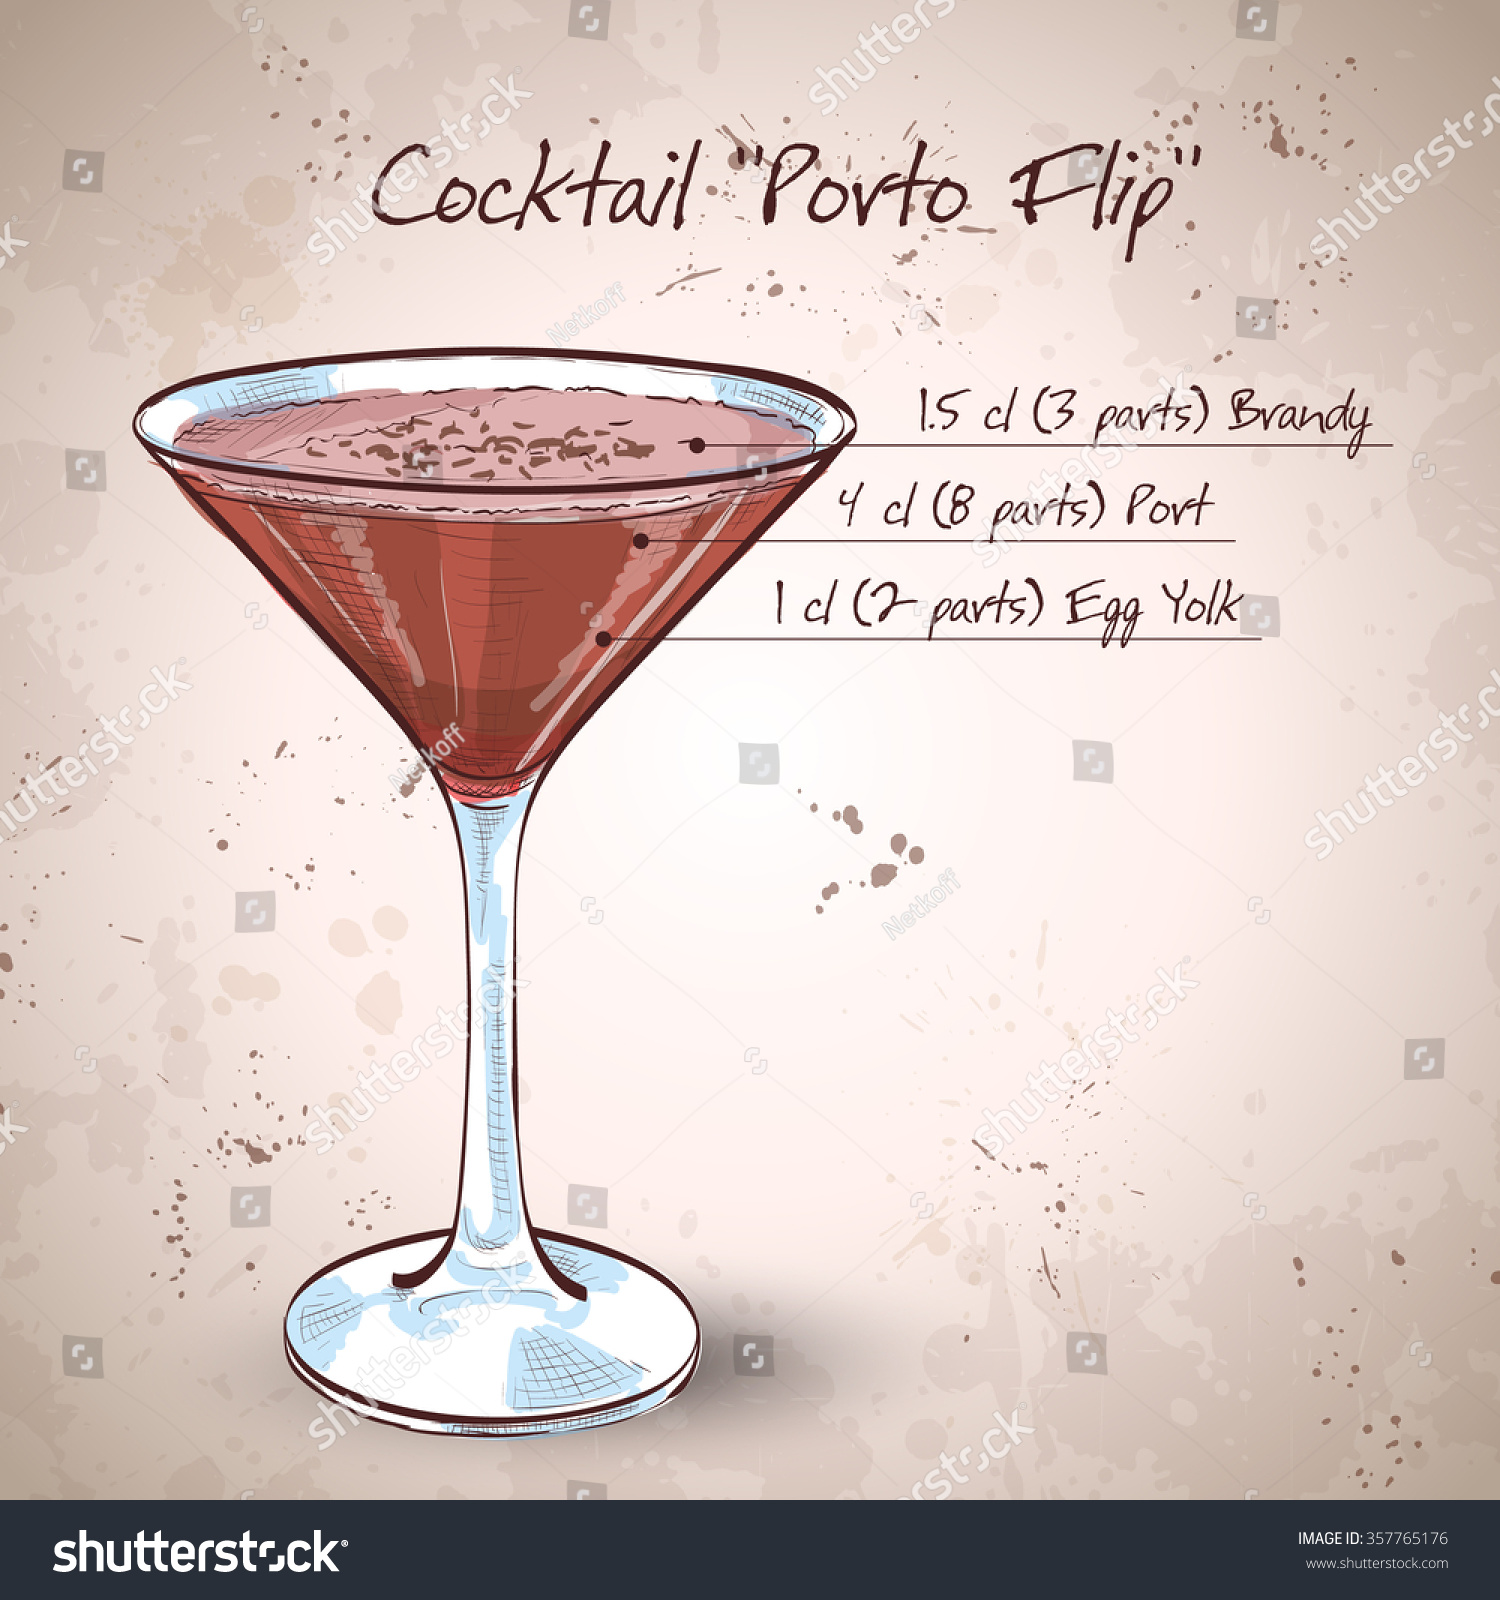 Porto Flip Cocktail : Recipe, instructions and reviews